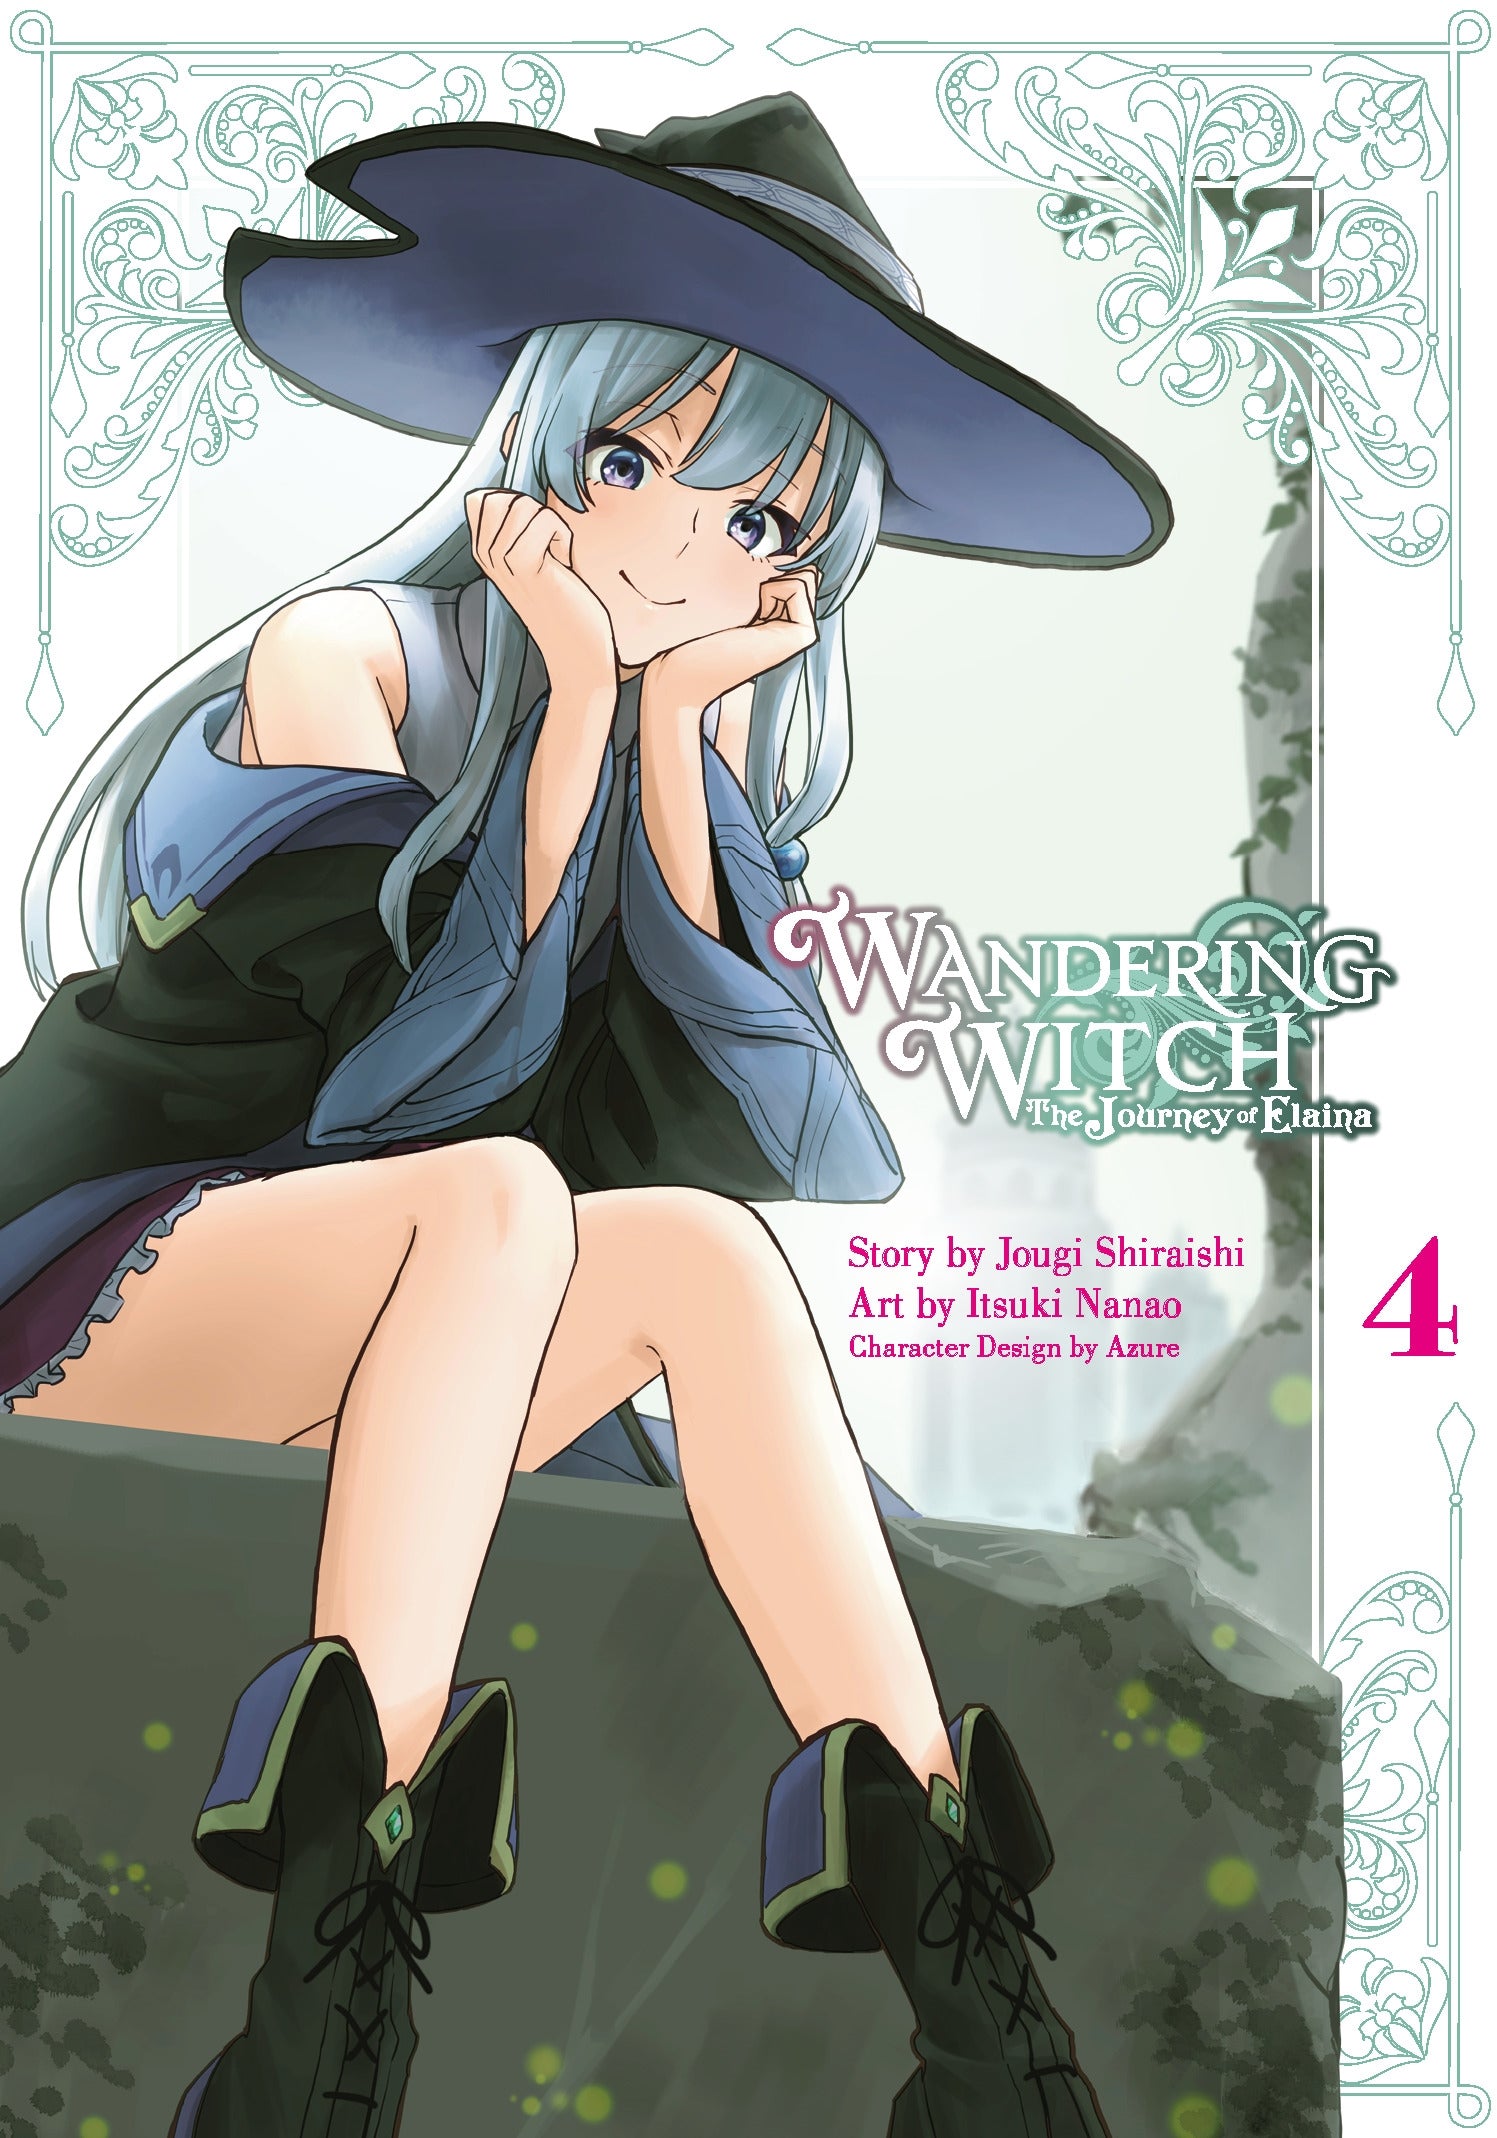 Wandering Witch : The Journey of Elaina, Vol.4